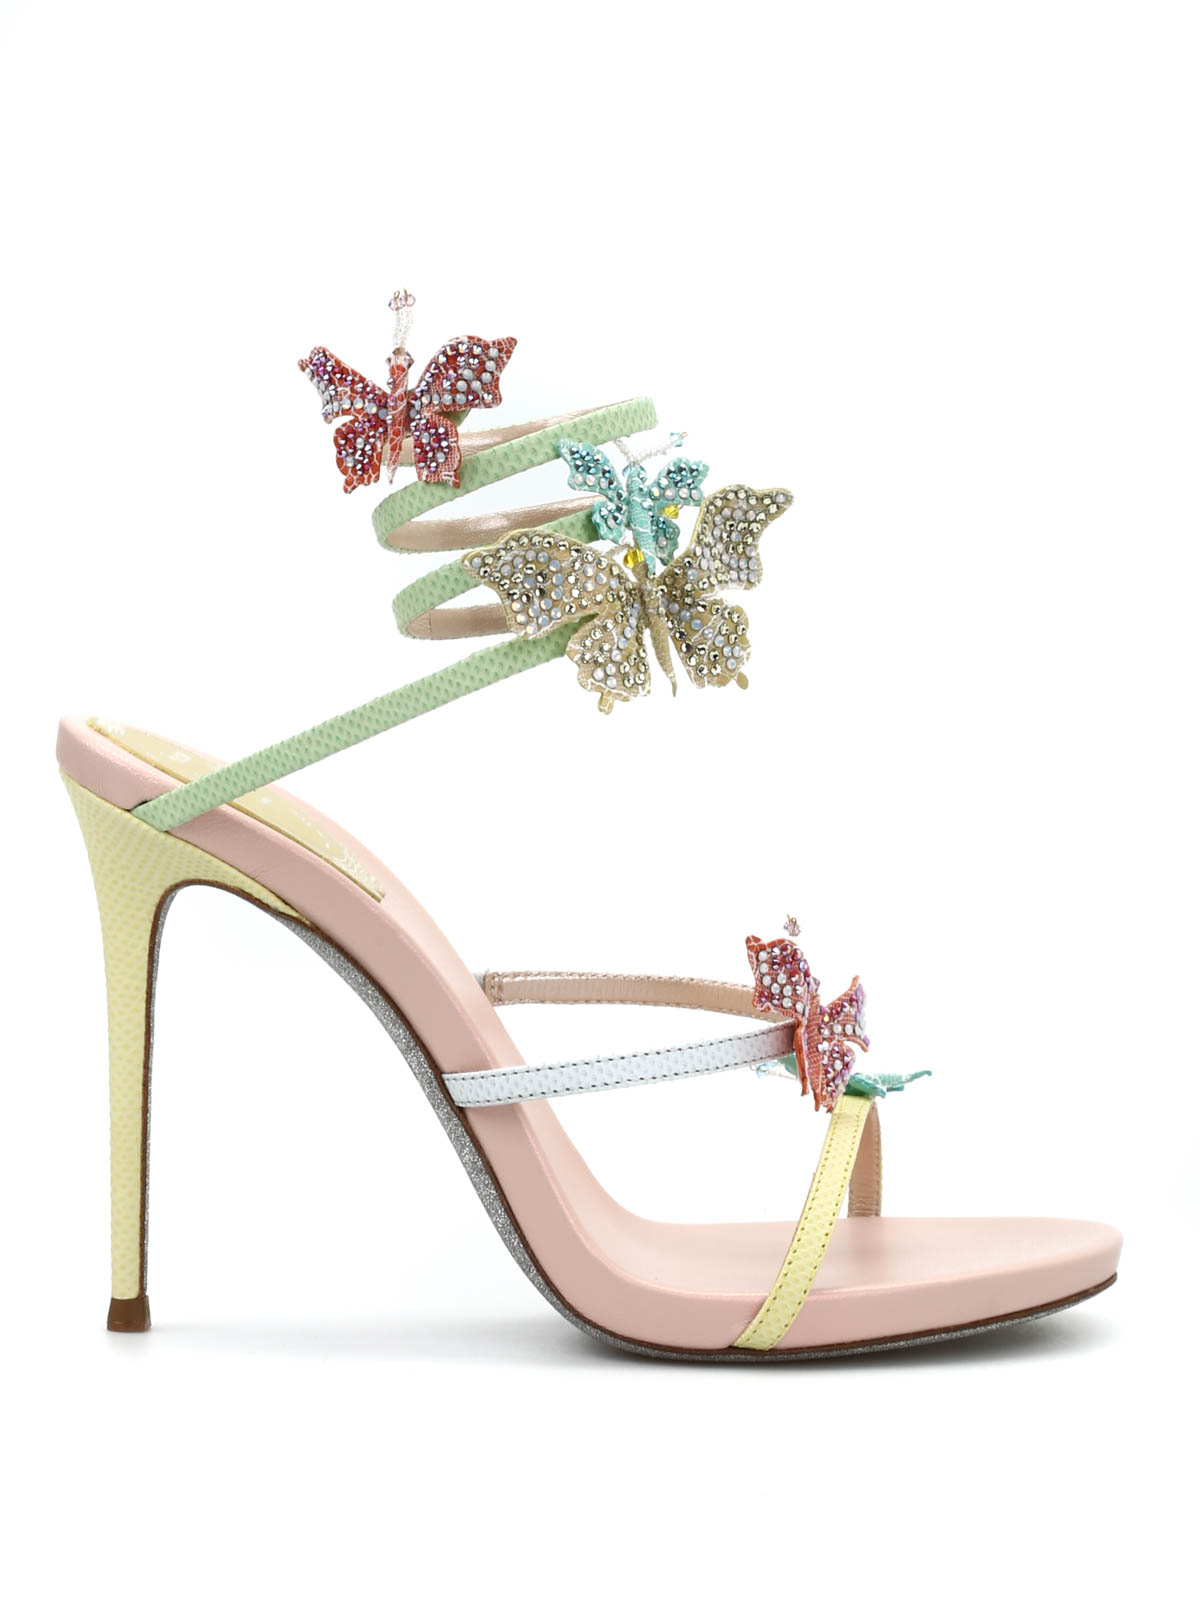 Sandals Rene Caovilla - Rhinestone and butterfly sandals ...